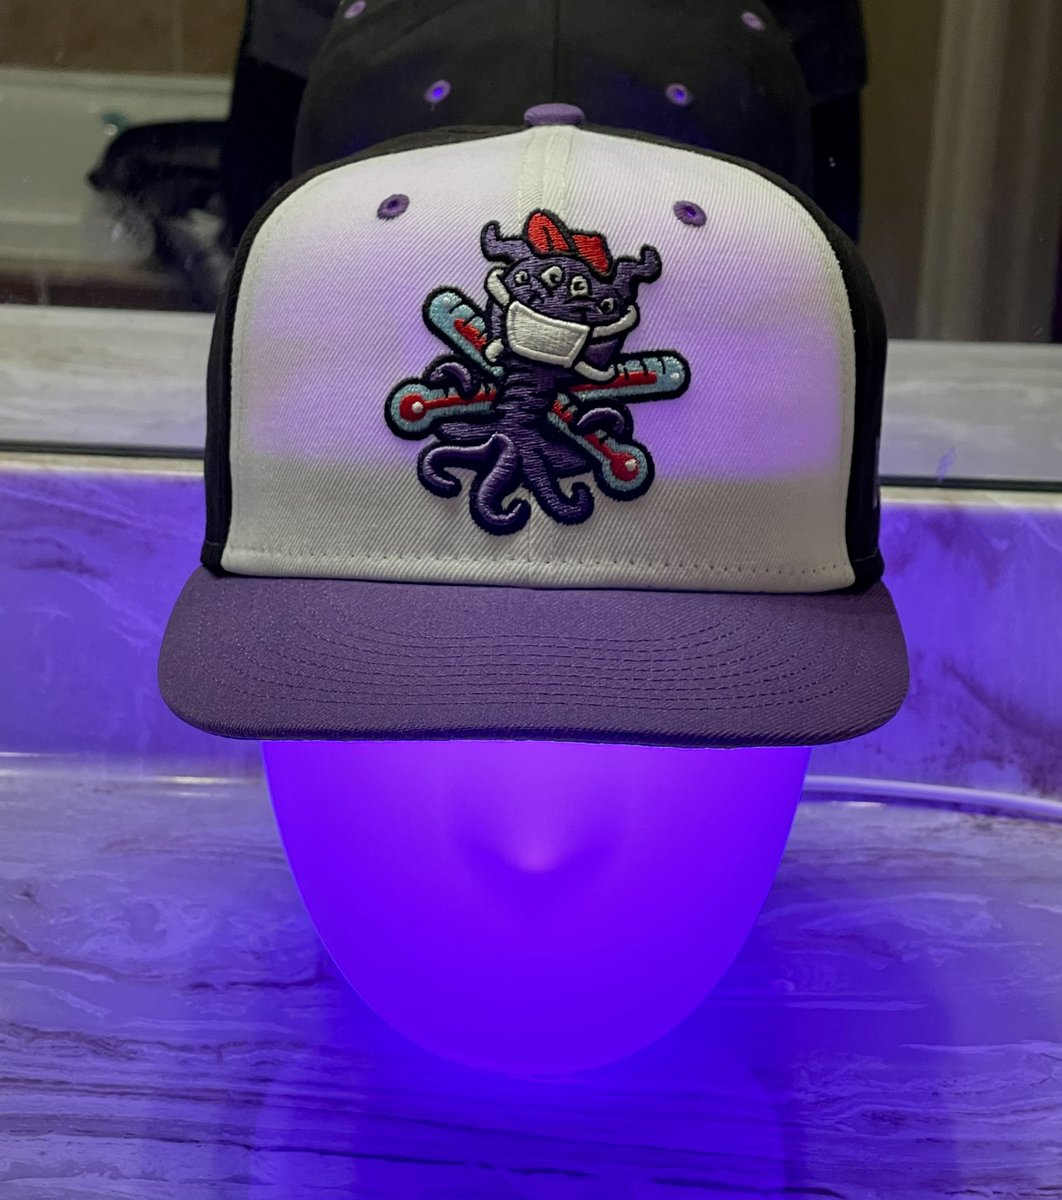 Today’s #HatOfTheDay (modeled by ISKÄRNA, the weird @IKEAUSA glowing head) is from the Memphis Fever Germs (@memphisredbirds) Big thanks to @patlarson1 for showing us this hat on his #MiLBHatHistorySeries!